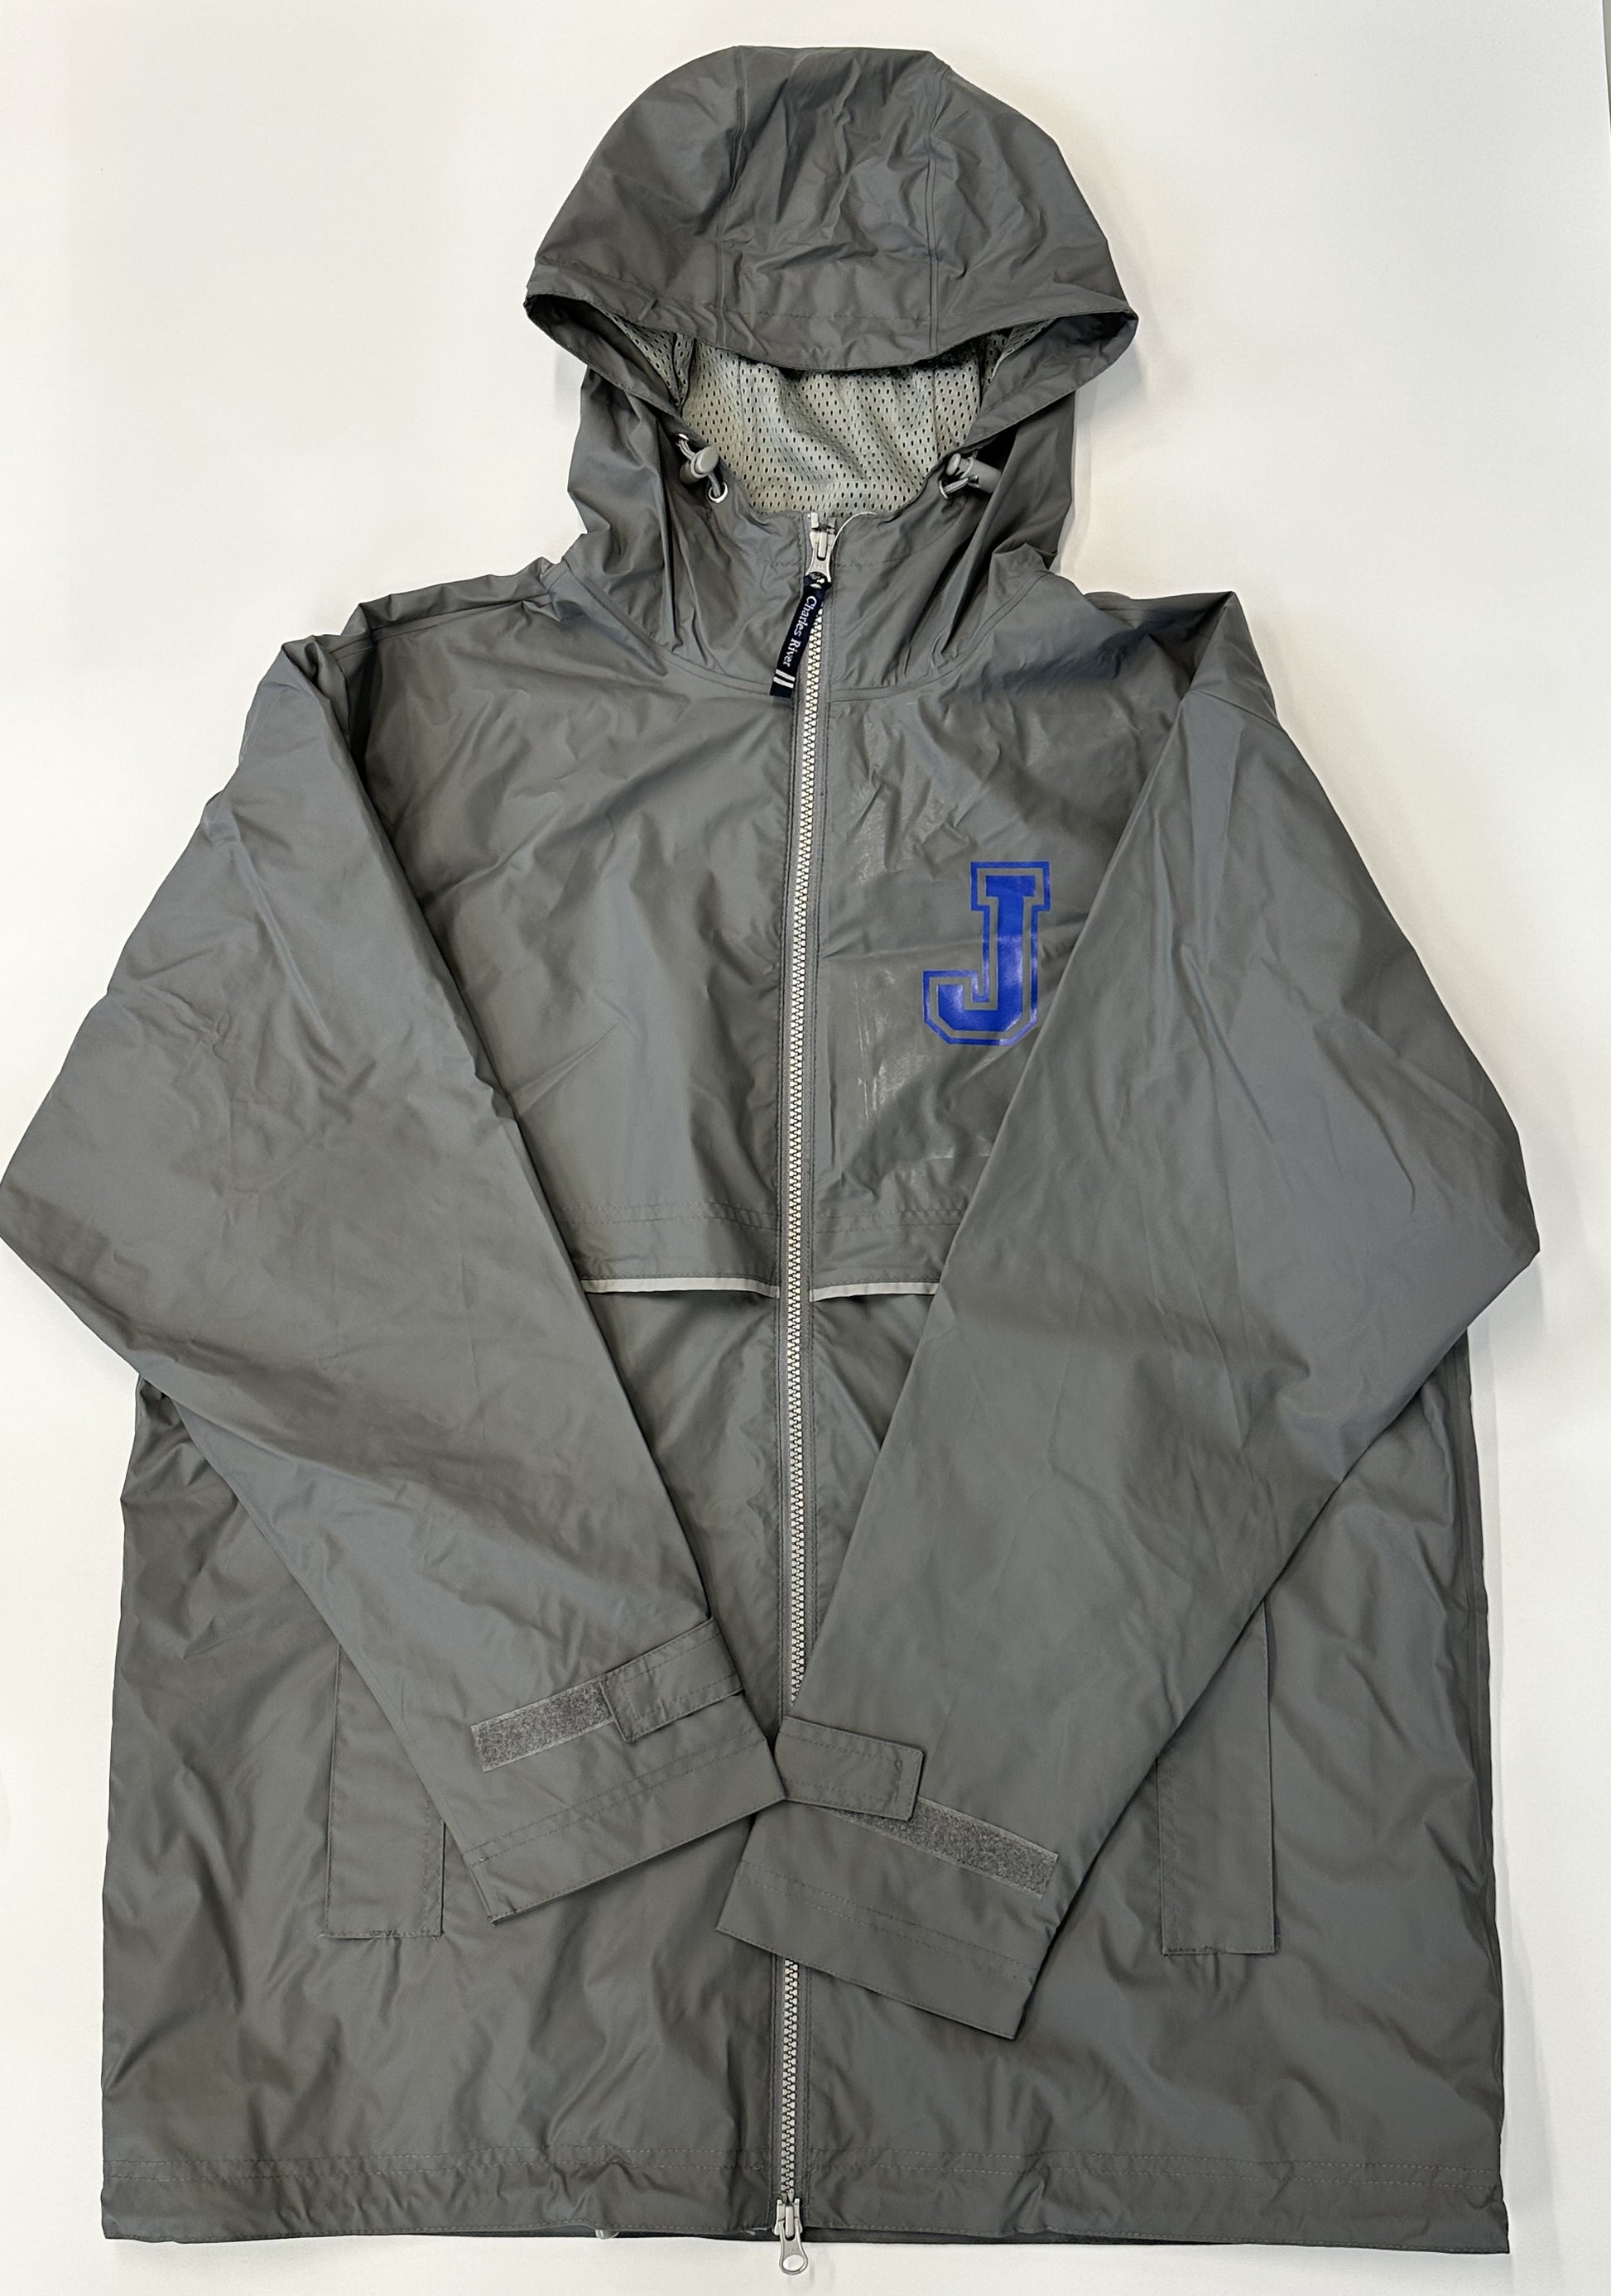 Charles River.  Shell:  100% Polyurethane  Backing & Body lining:  100% Polyester  Wind & Waterproof w/heat sealed seams for weather protection.  2 way zipper for easy movement.  Reflective trim across back for visibility.  Runs big so you may want to size down!